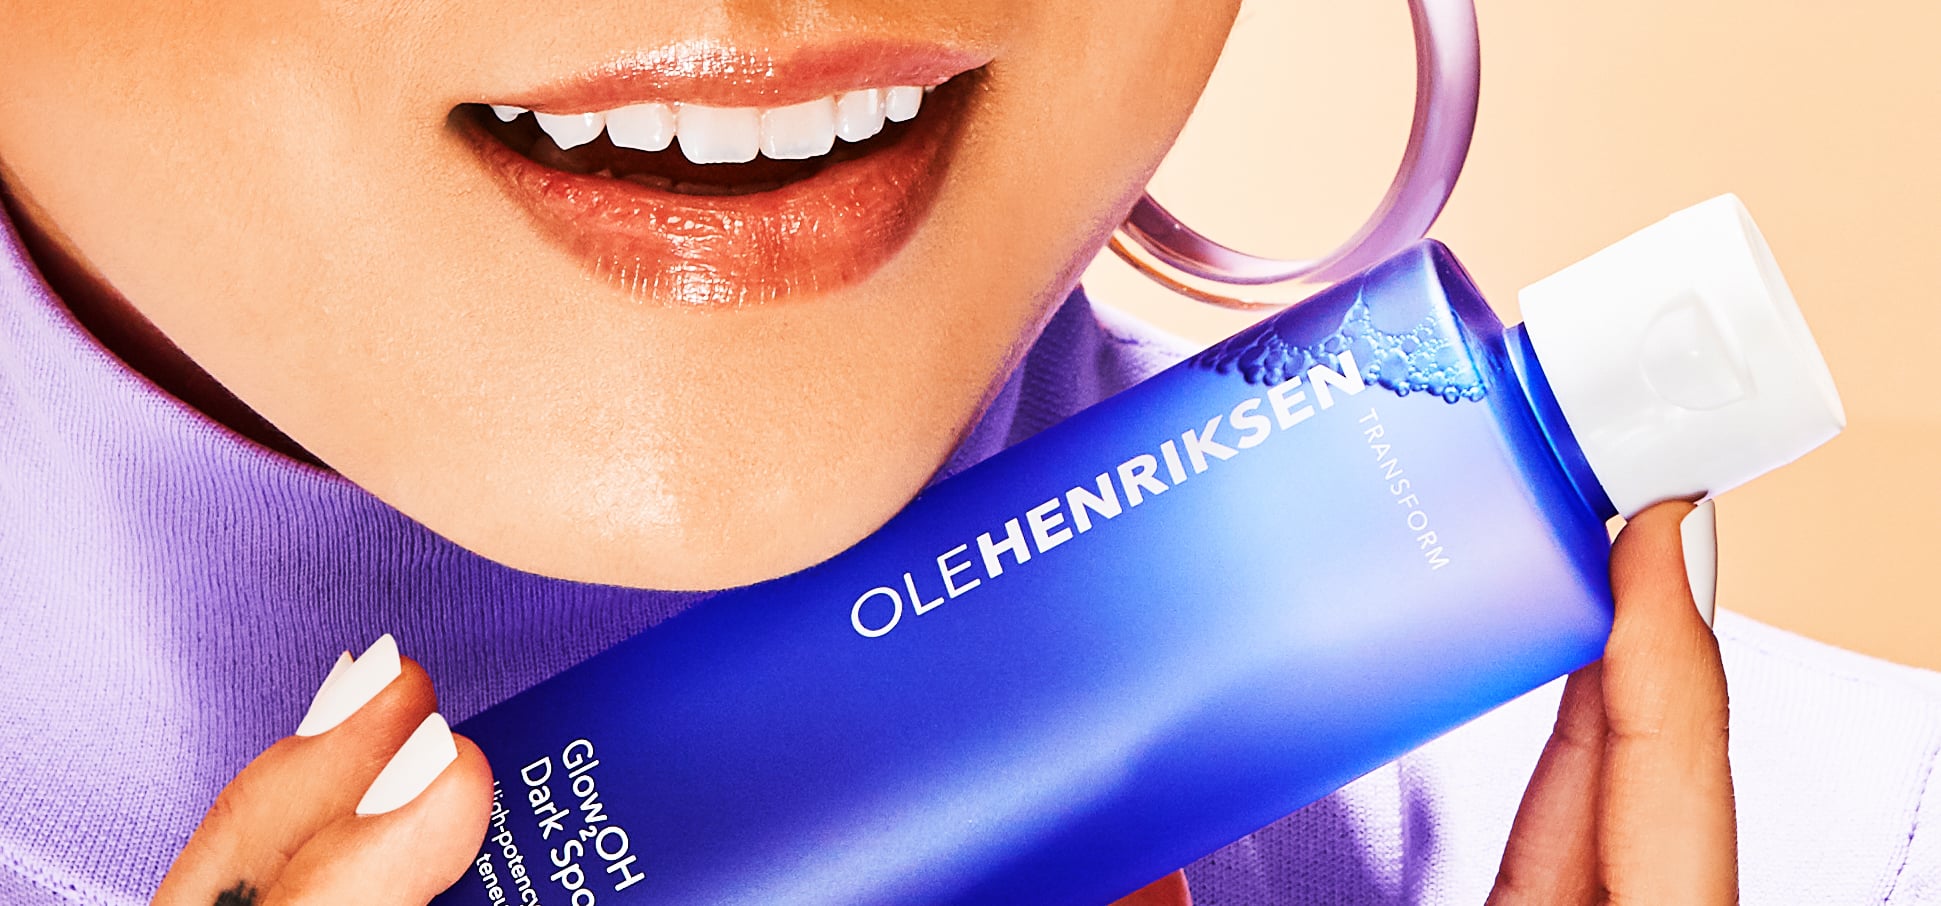 Ole Henriksen - The Works - The Beauty Look Book